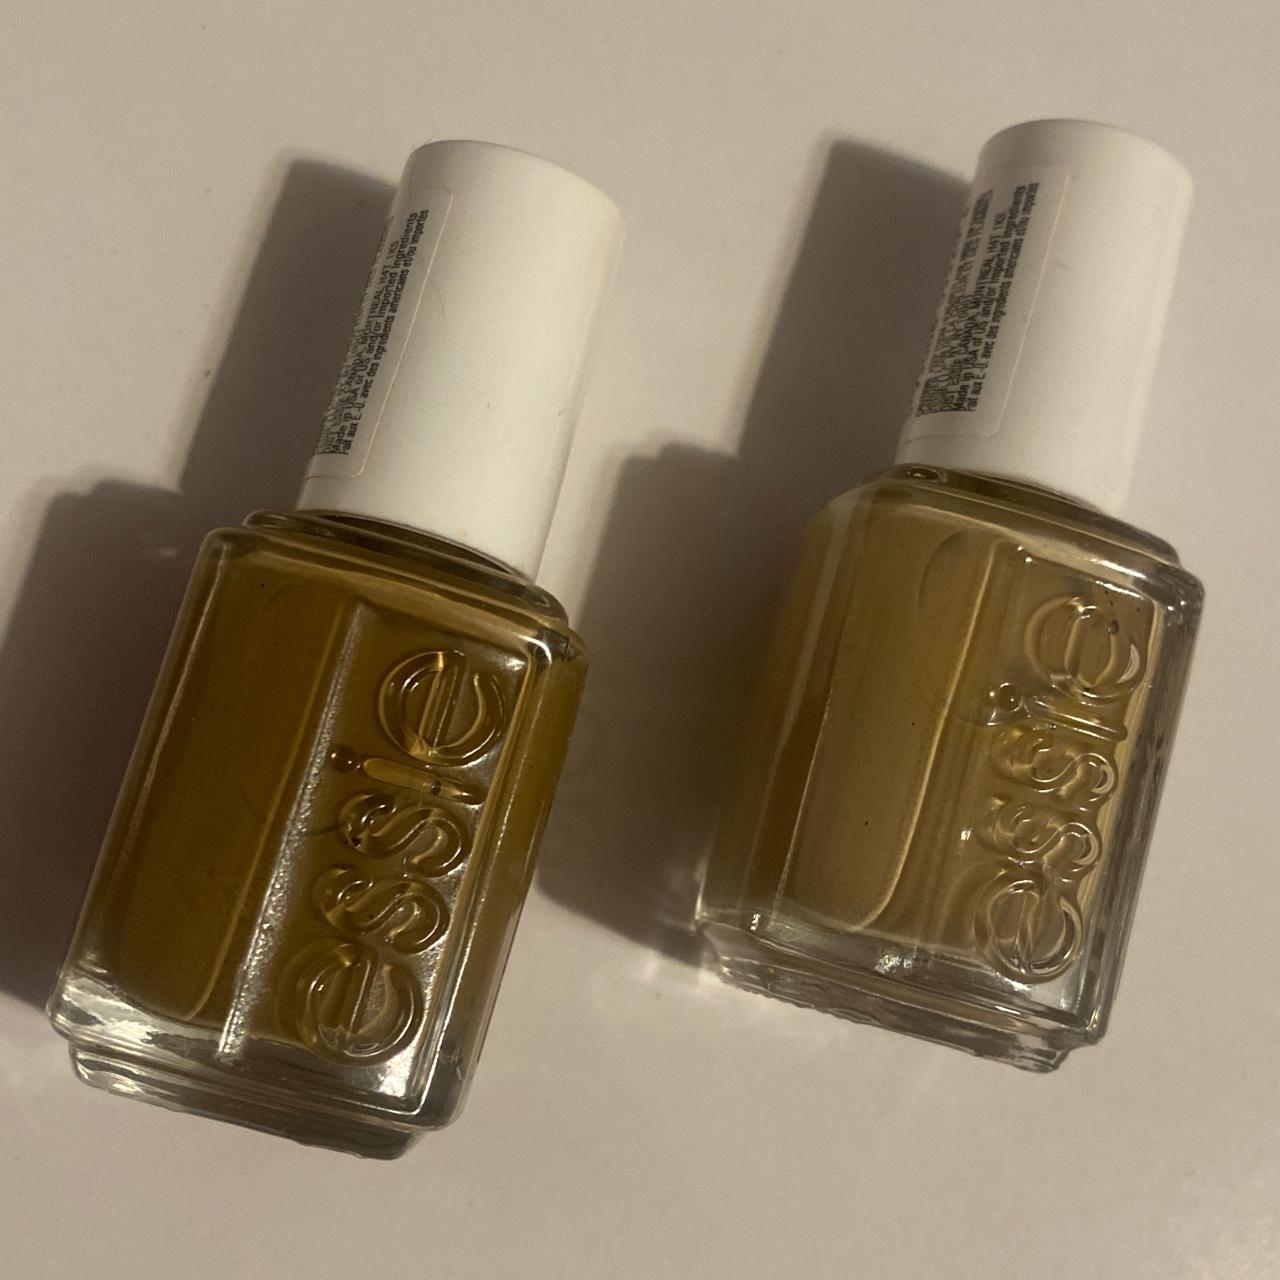 Nails Always Polished: Essie Good as Gold